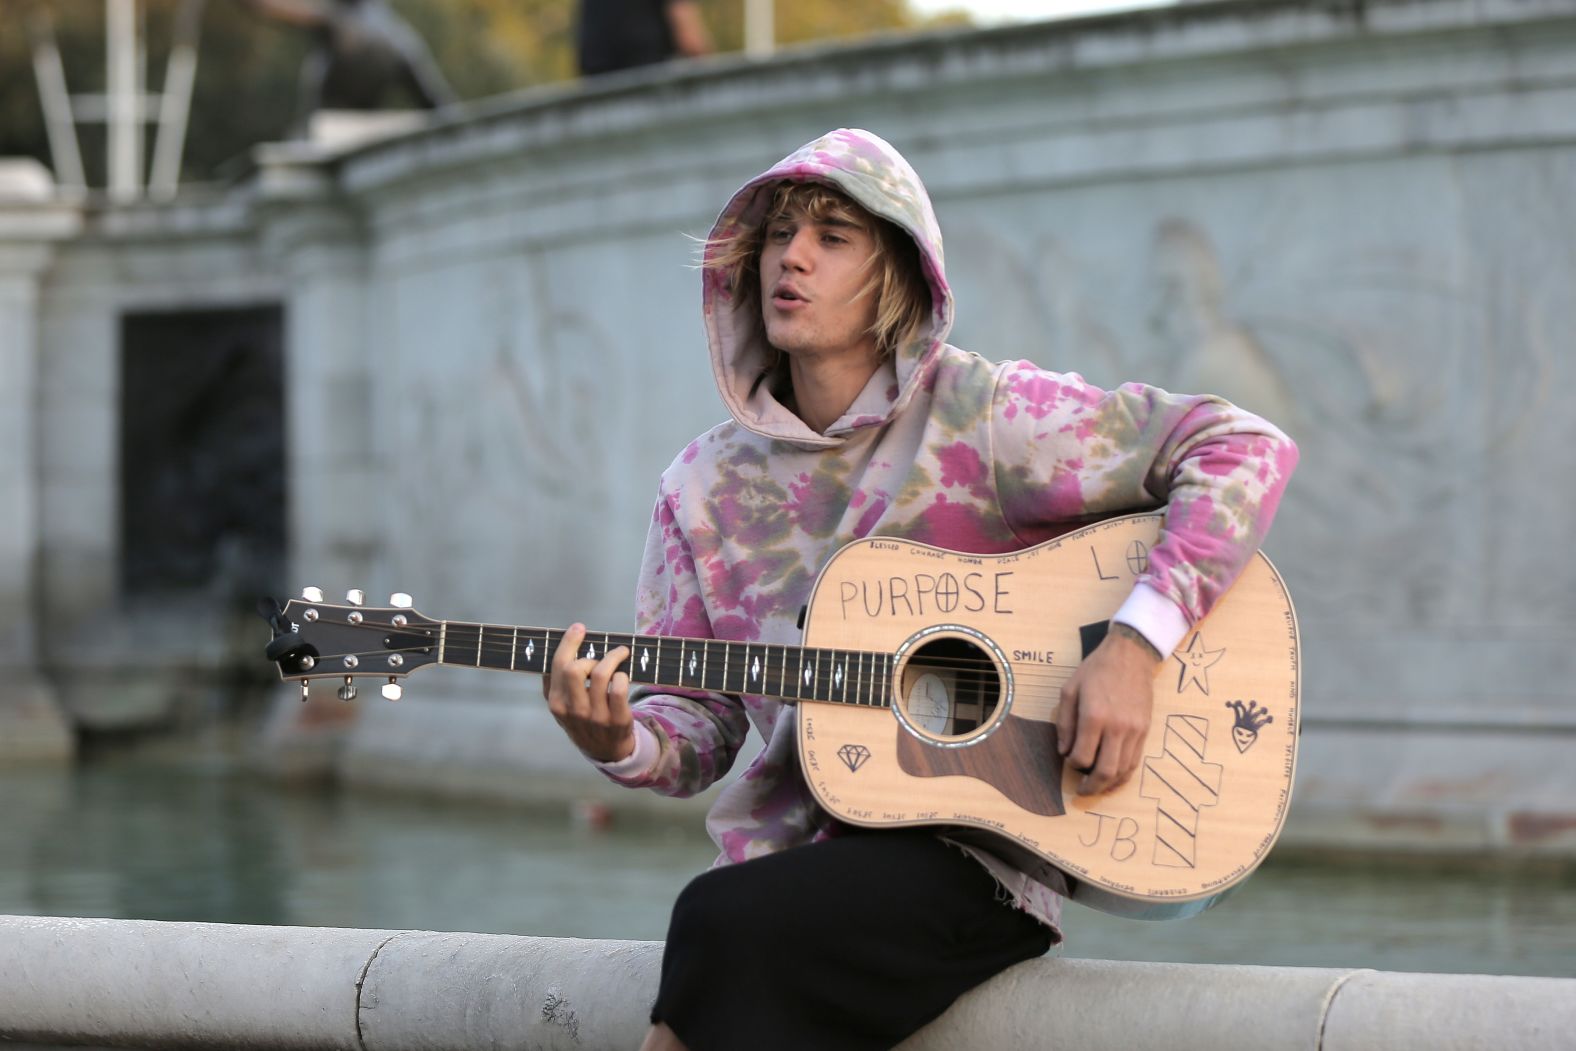 Bieber plays a guitar outside Buckingham Palace in London in September 2018. <a href="https://www.cnn.com/2018/09/19/entertainment/justin-bieber-hailey-baldwin-london-surprise-trip-intl/index.html" target="_blank">The unexpected performance</a> came while Bieber and Baldwin were out sightseeing. A small crowd gathered to watch his short acoustic set.